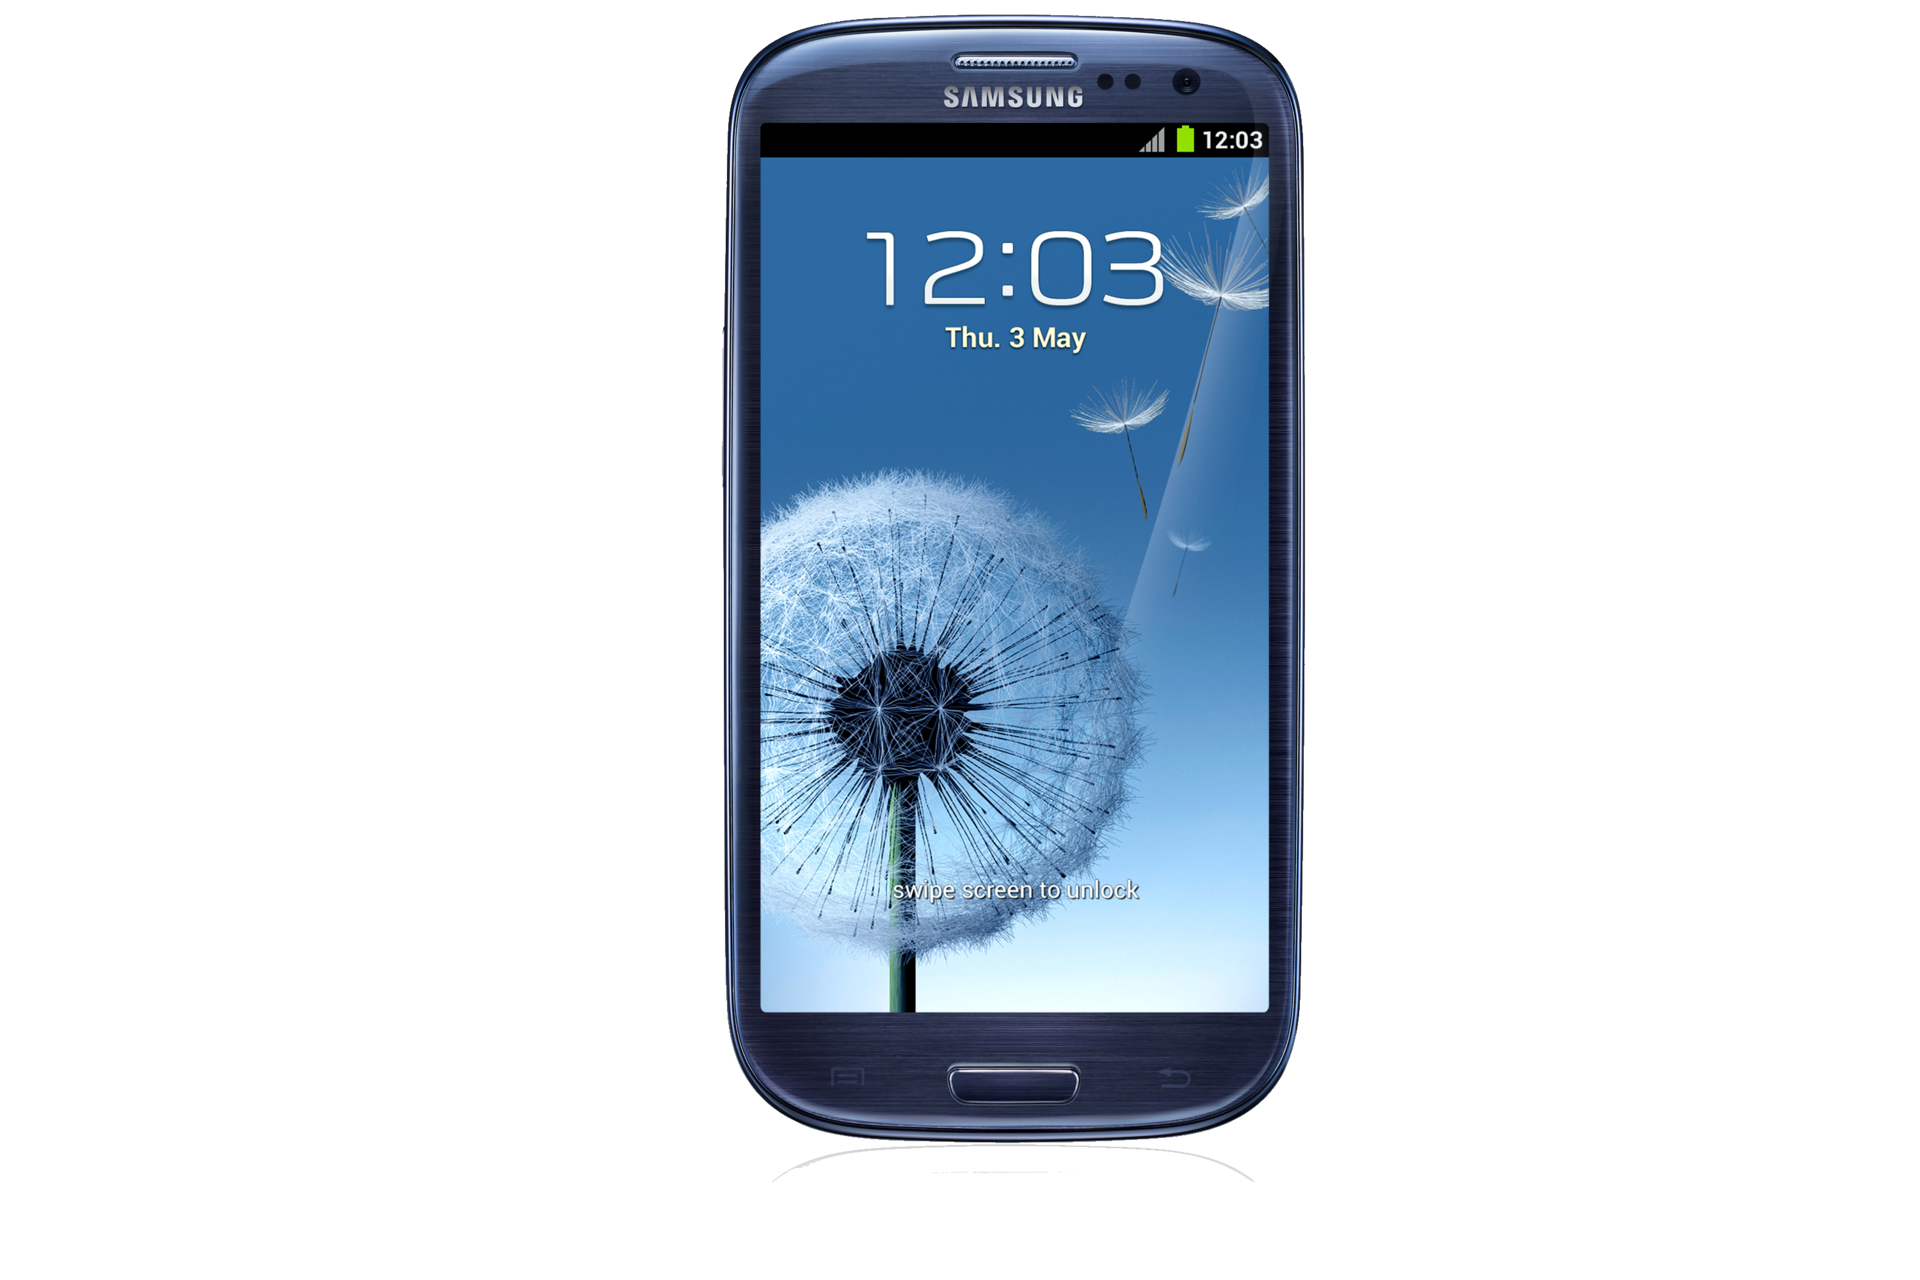 Samsung Galaxy S3 (Blue) - Full Specs and more | Samsung UK